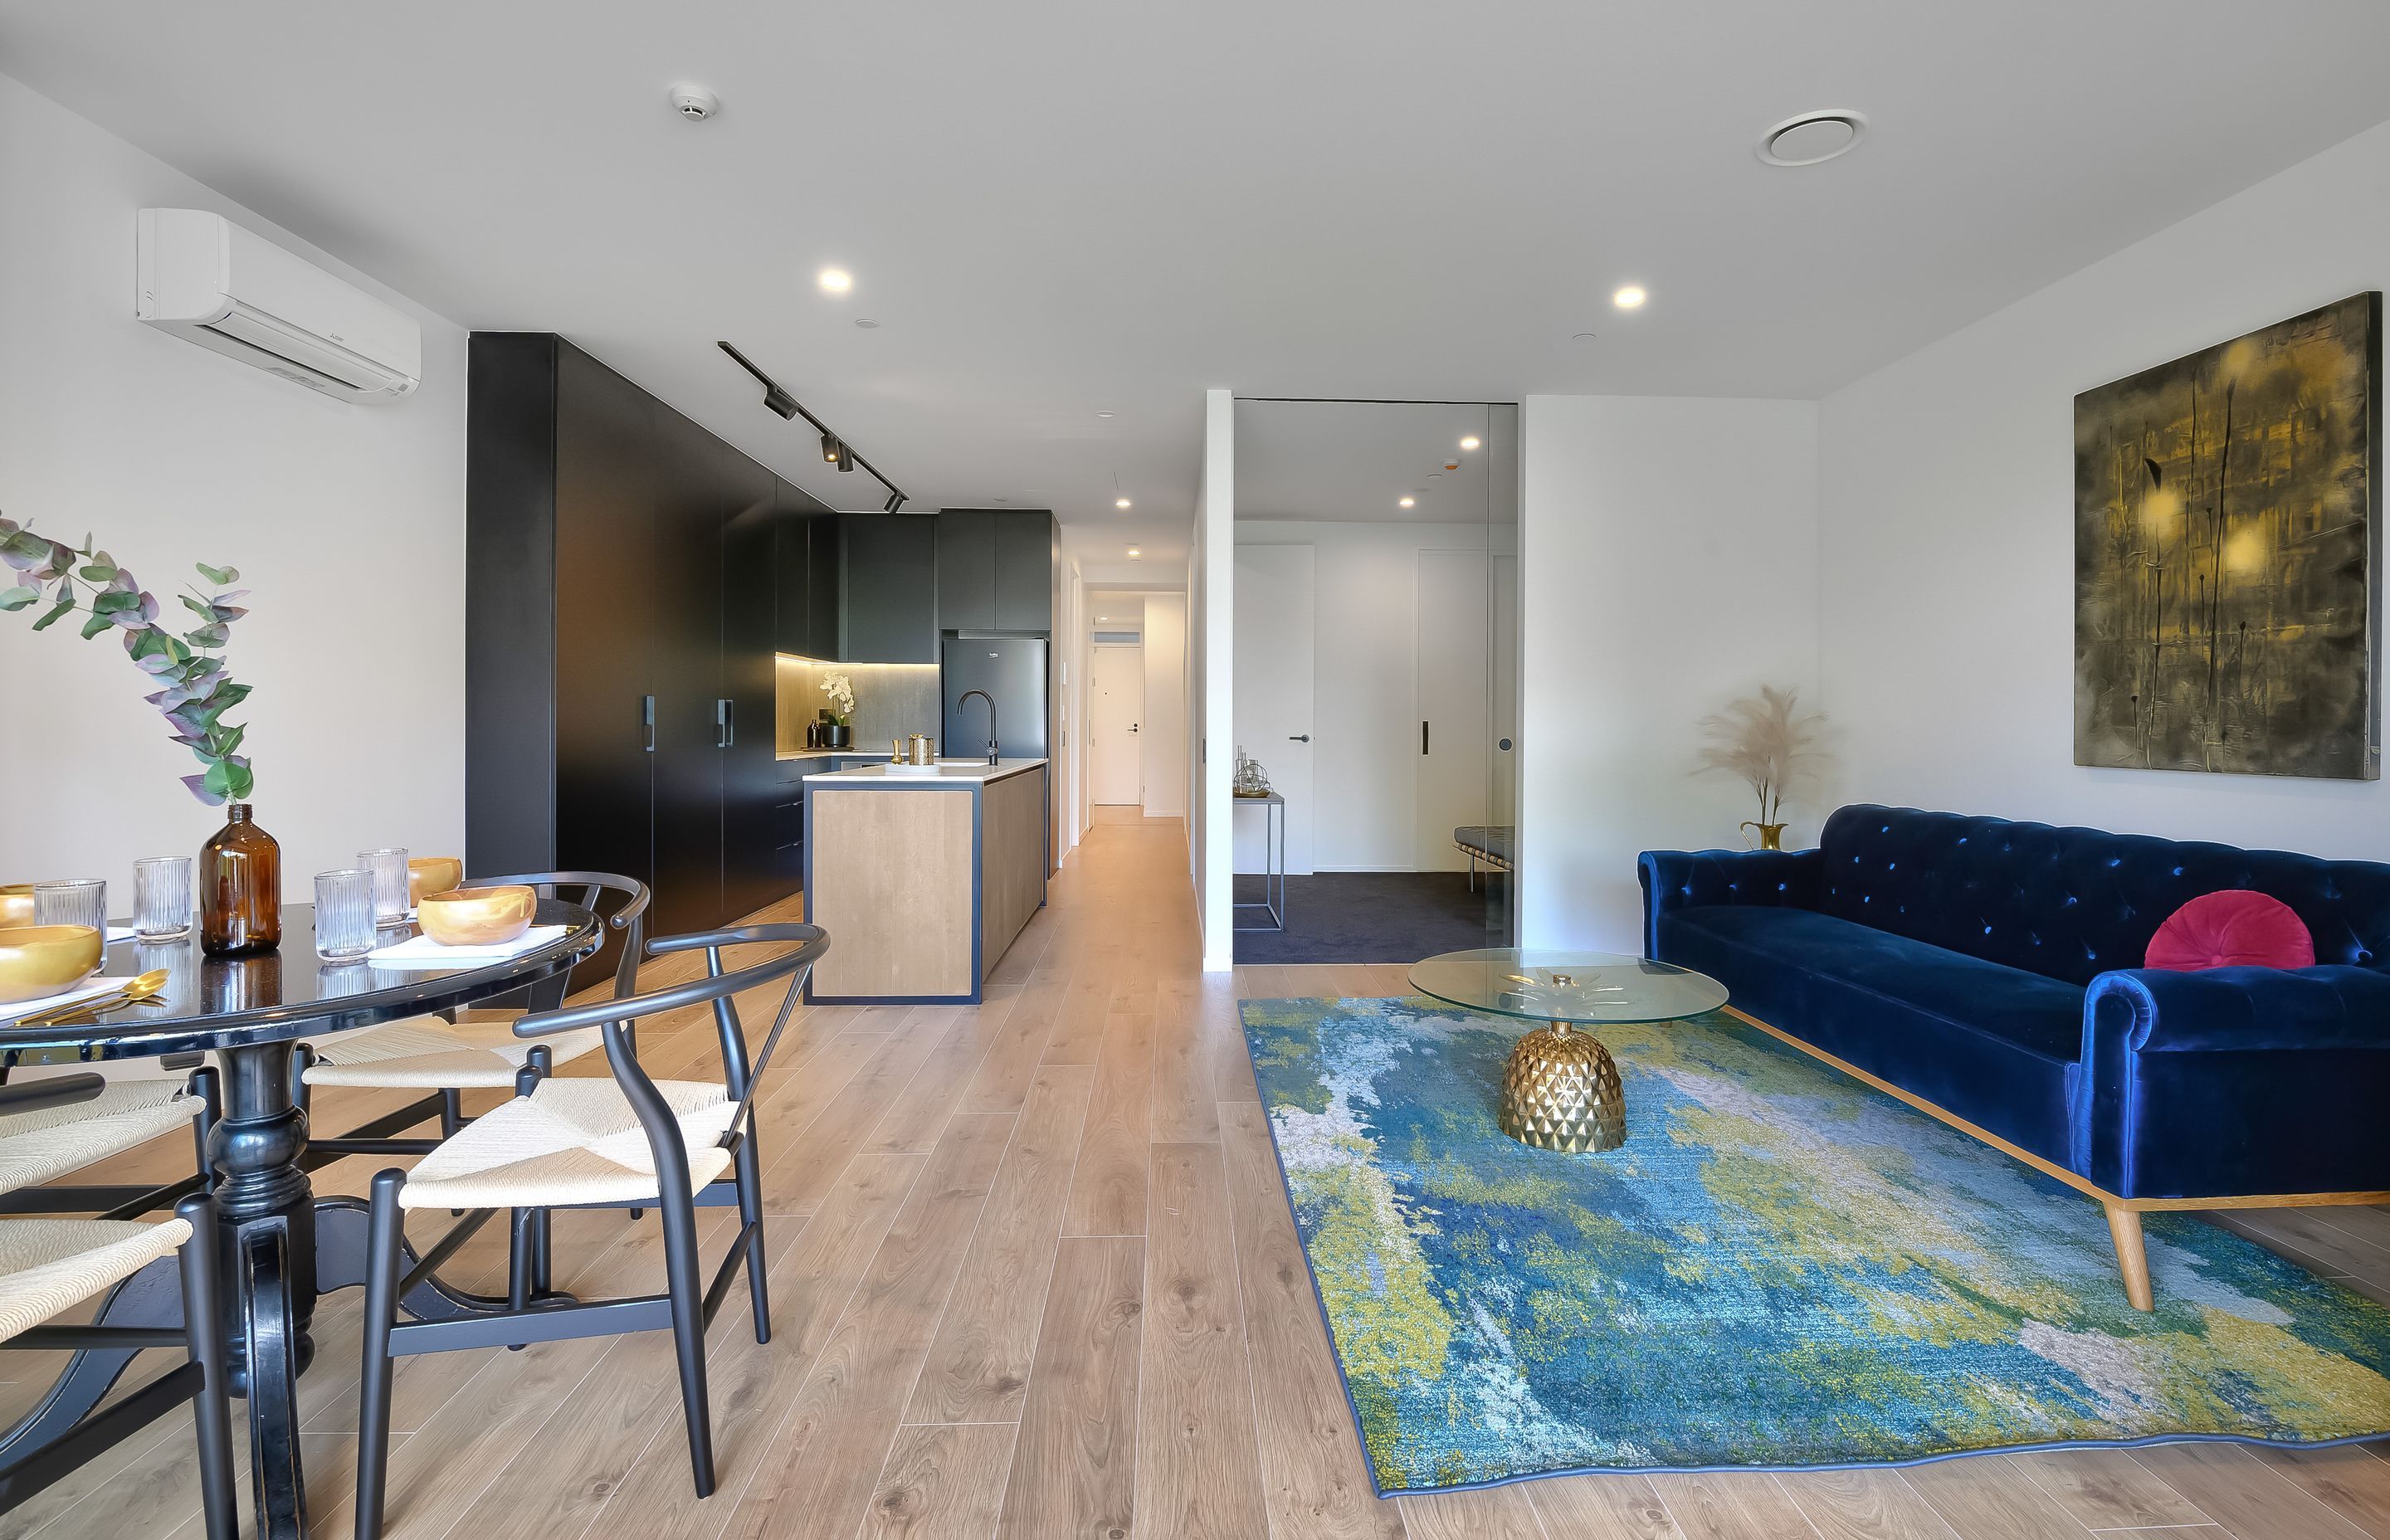 Parkside apartments include one bedroom plus flexi-space (as pictured) or two-bedroom layouts.